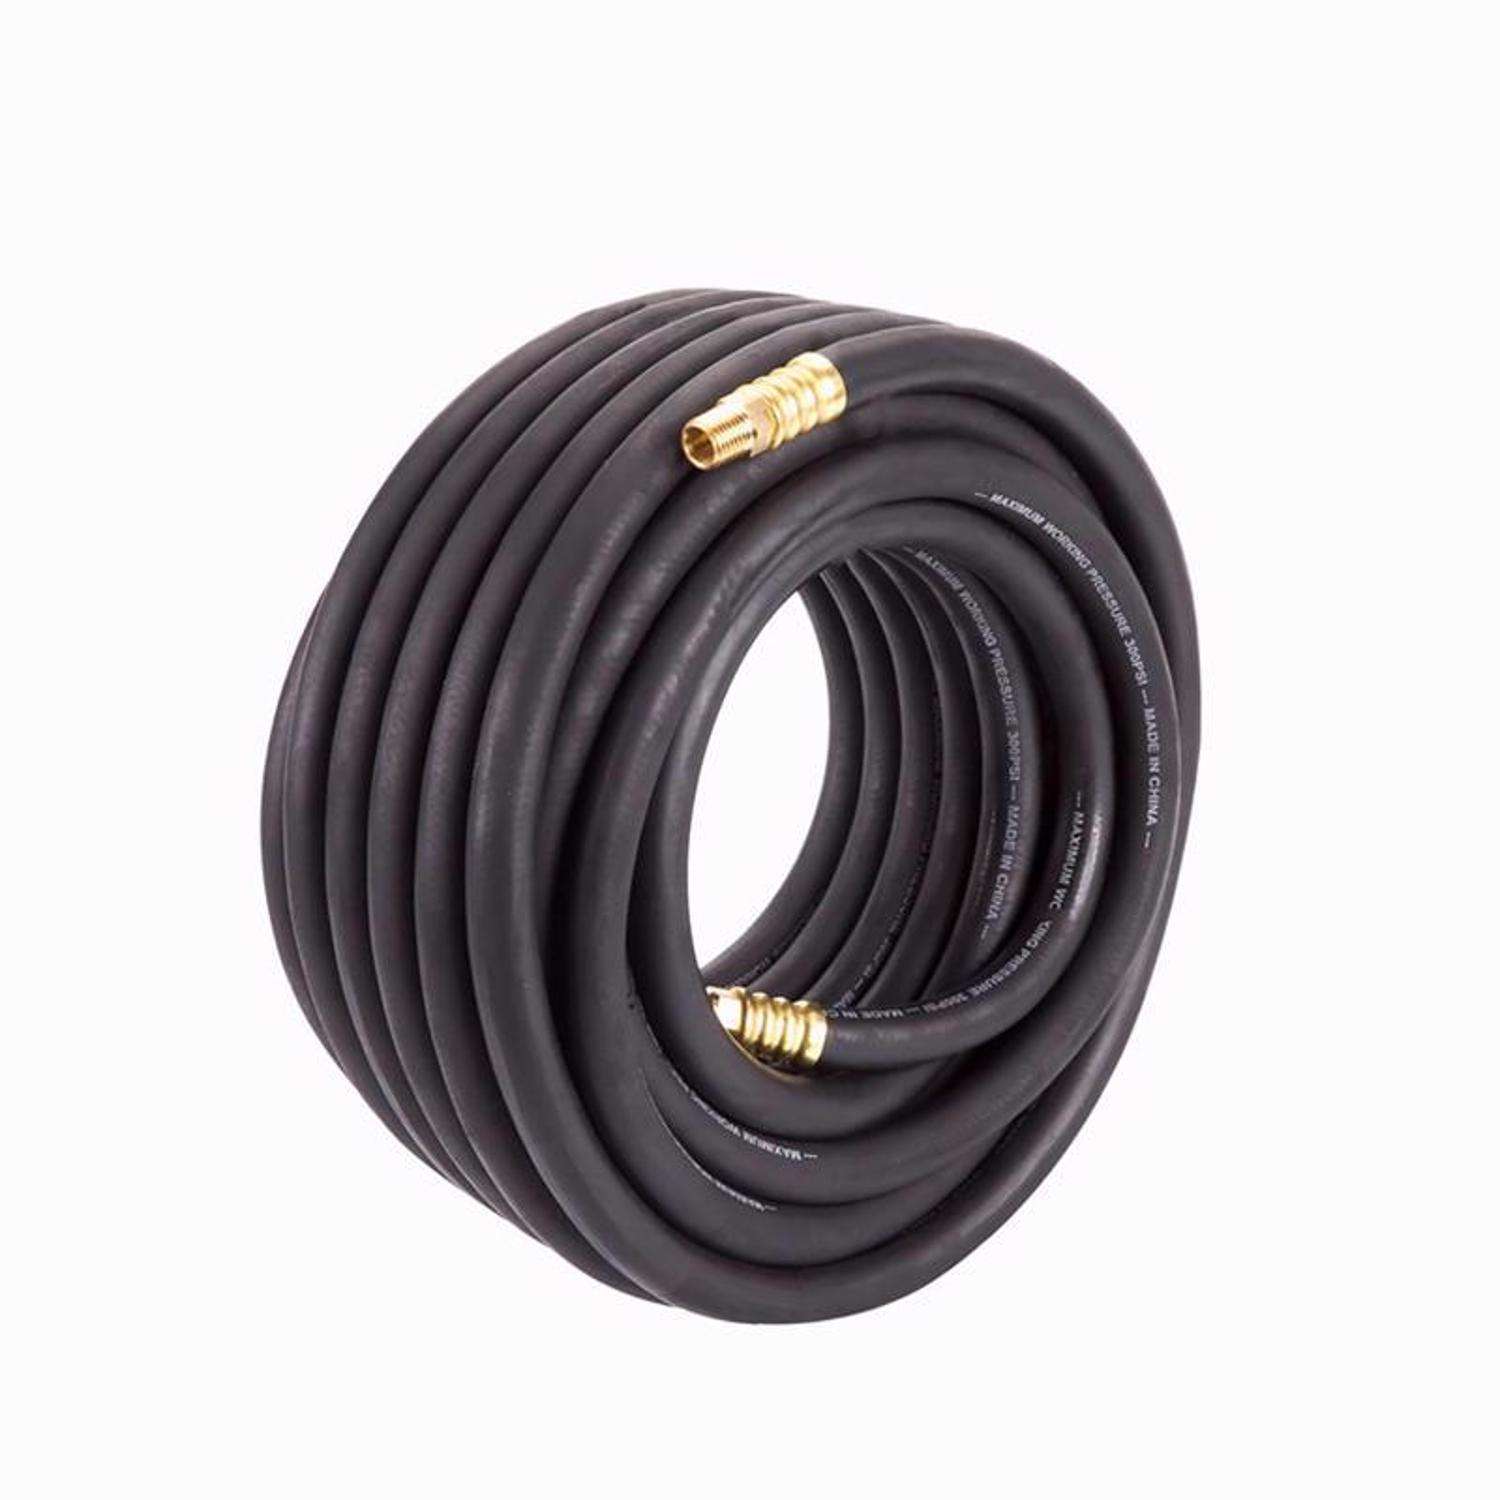 Craftsman 50 ft x 3/8 in Rubber Air Hose 300 PSI